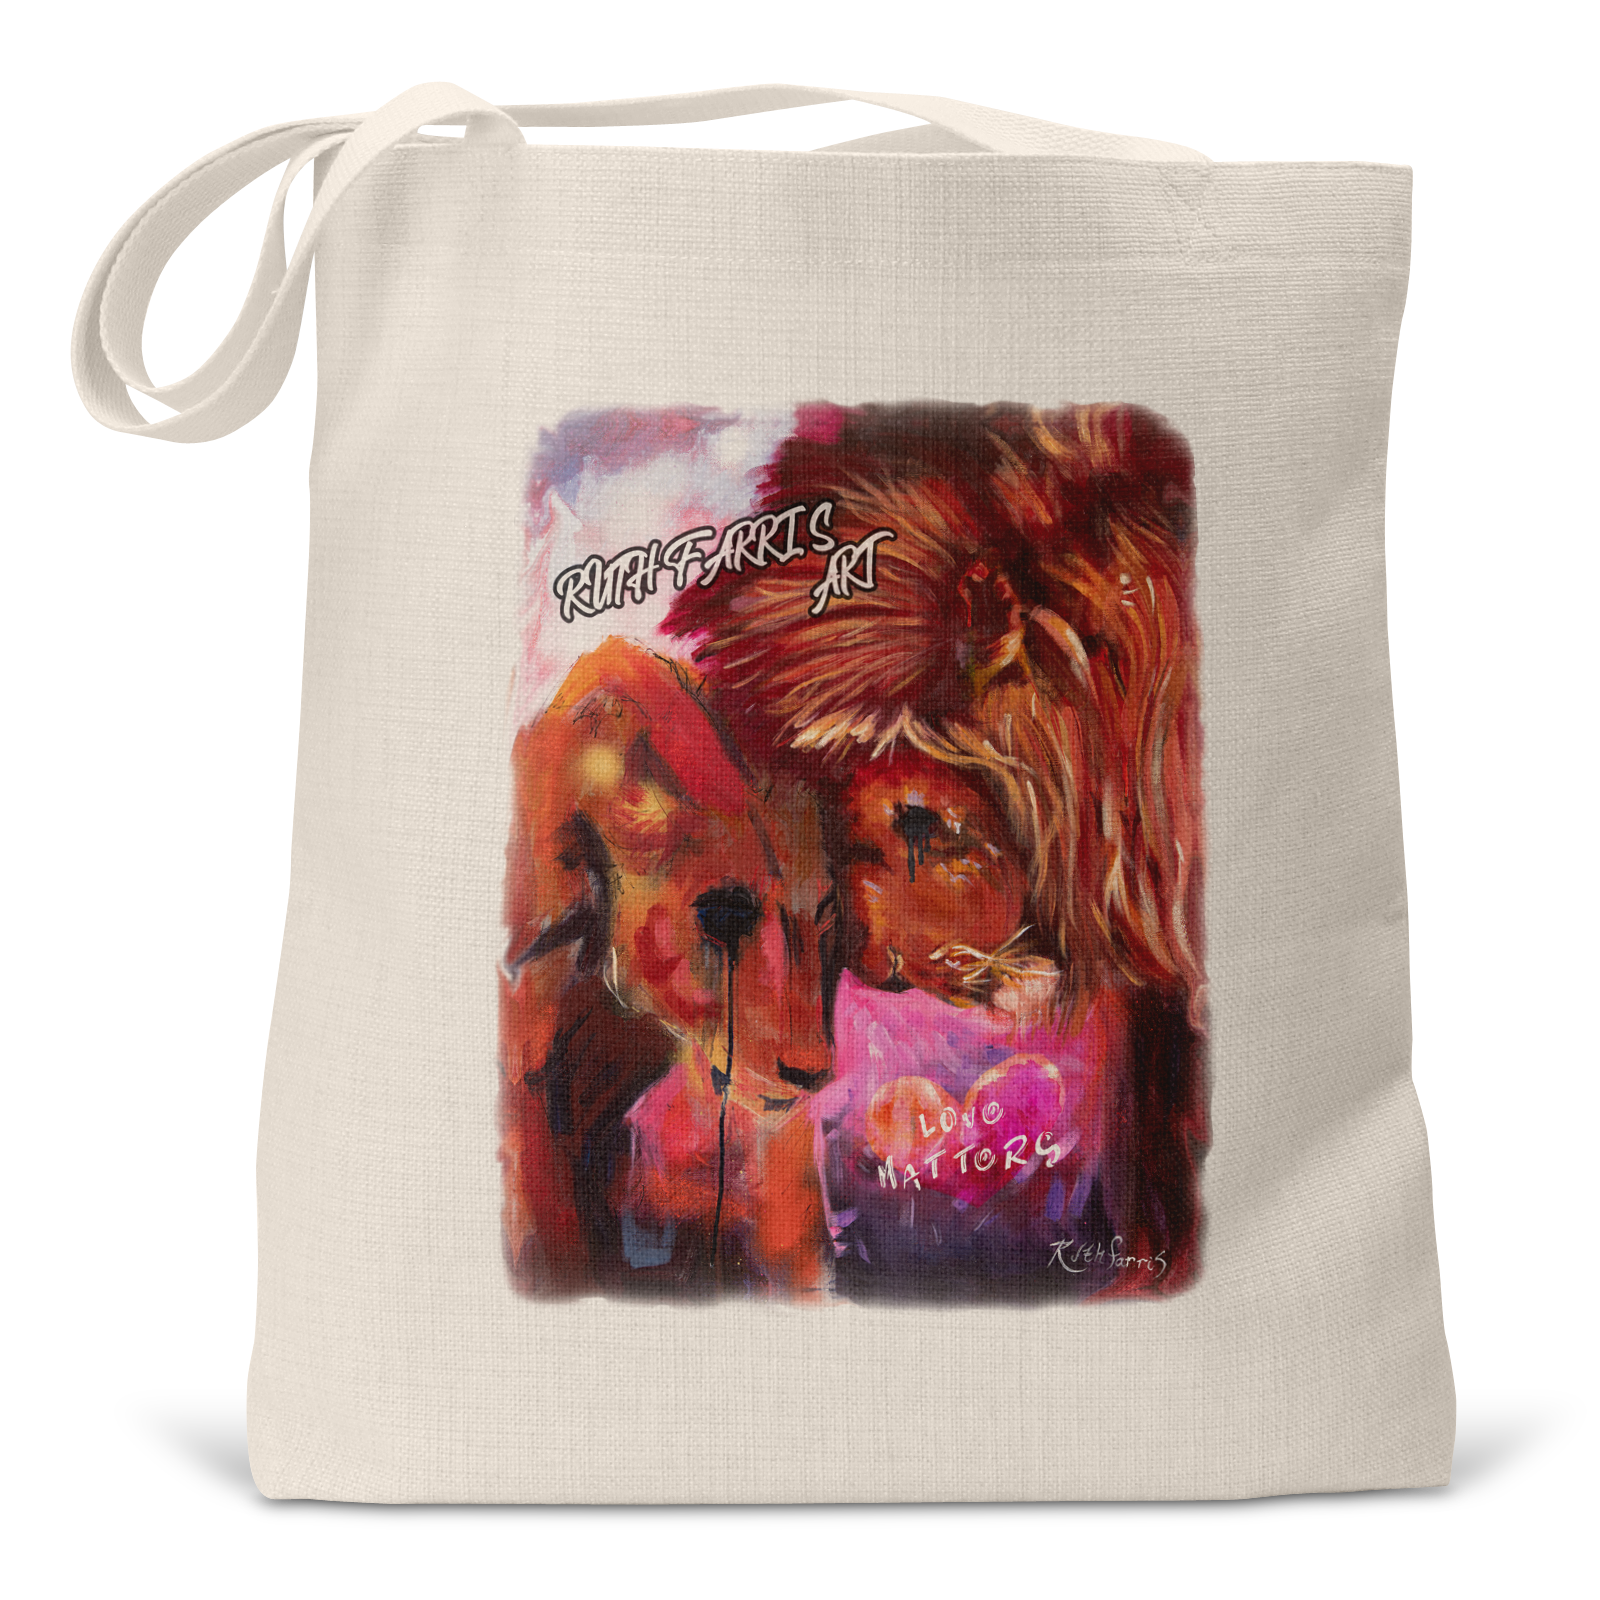 "Love Matters" - Small/Large Tote Bag